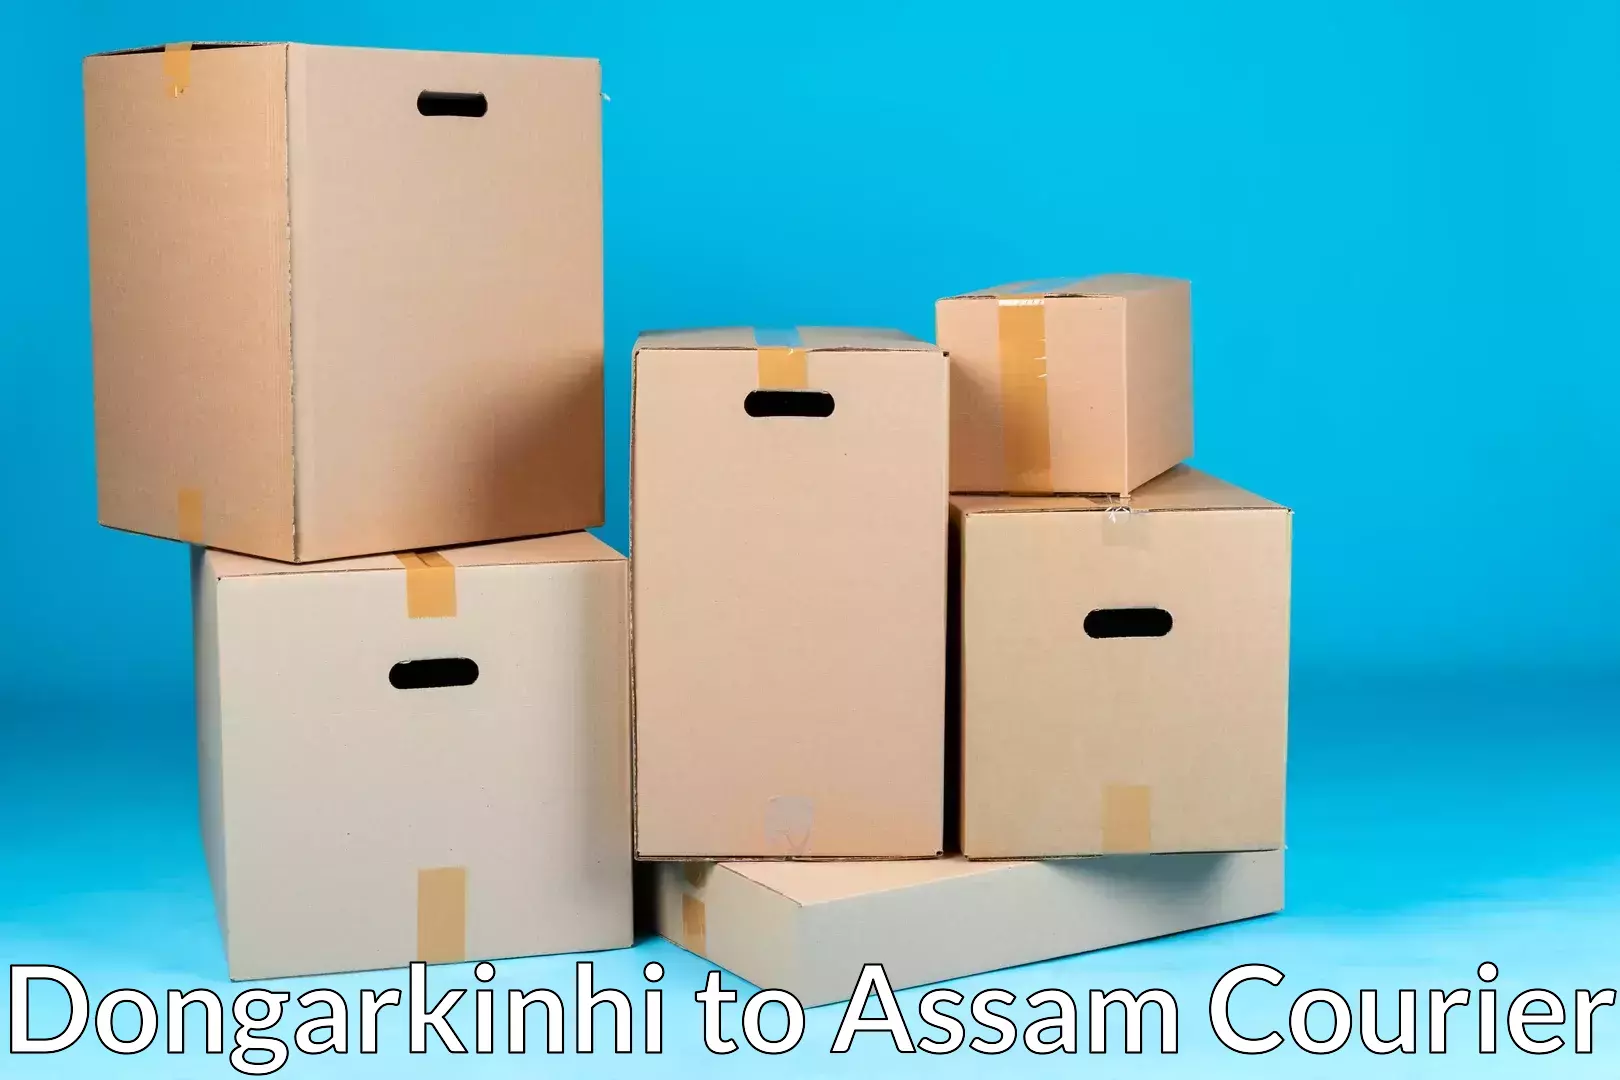 Home relocation services Dongarkinhi to Assam